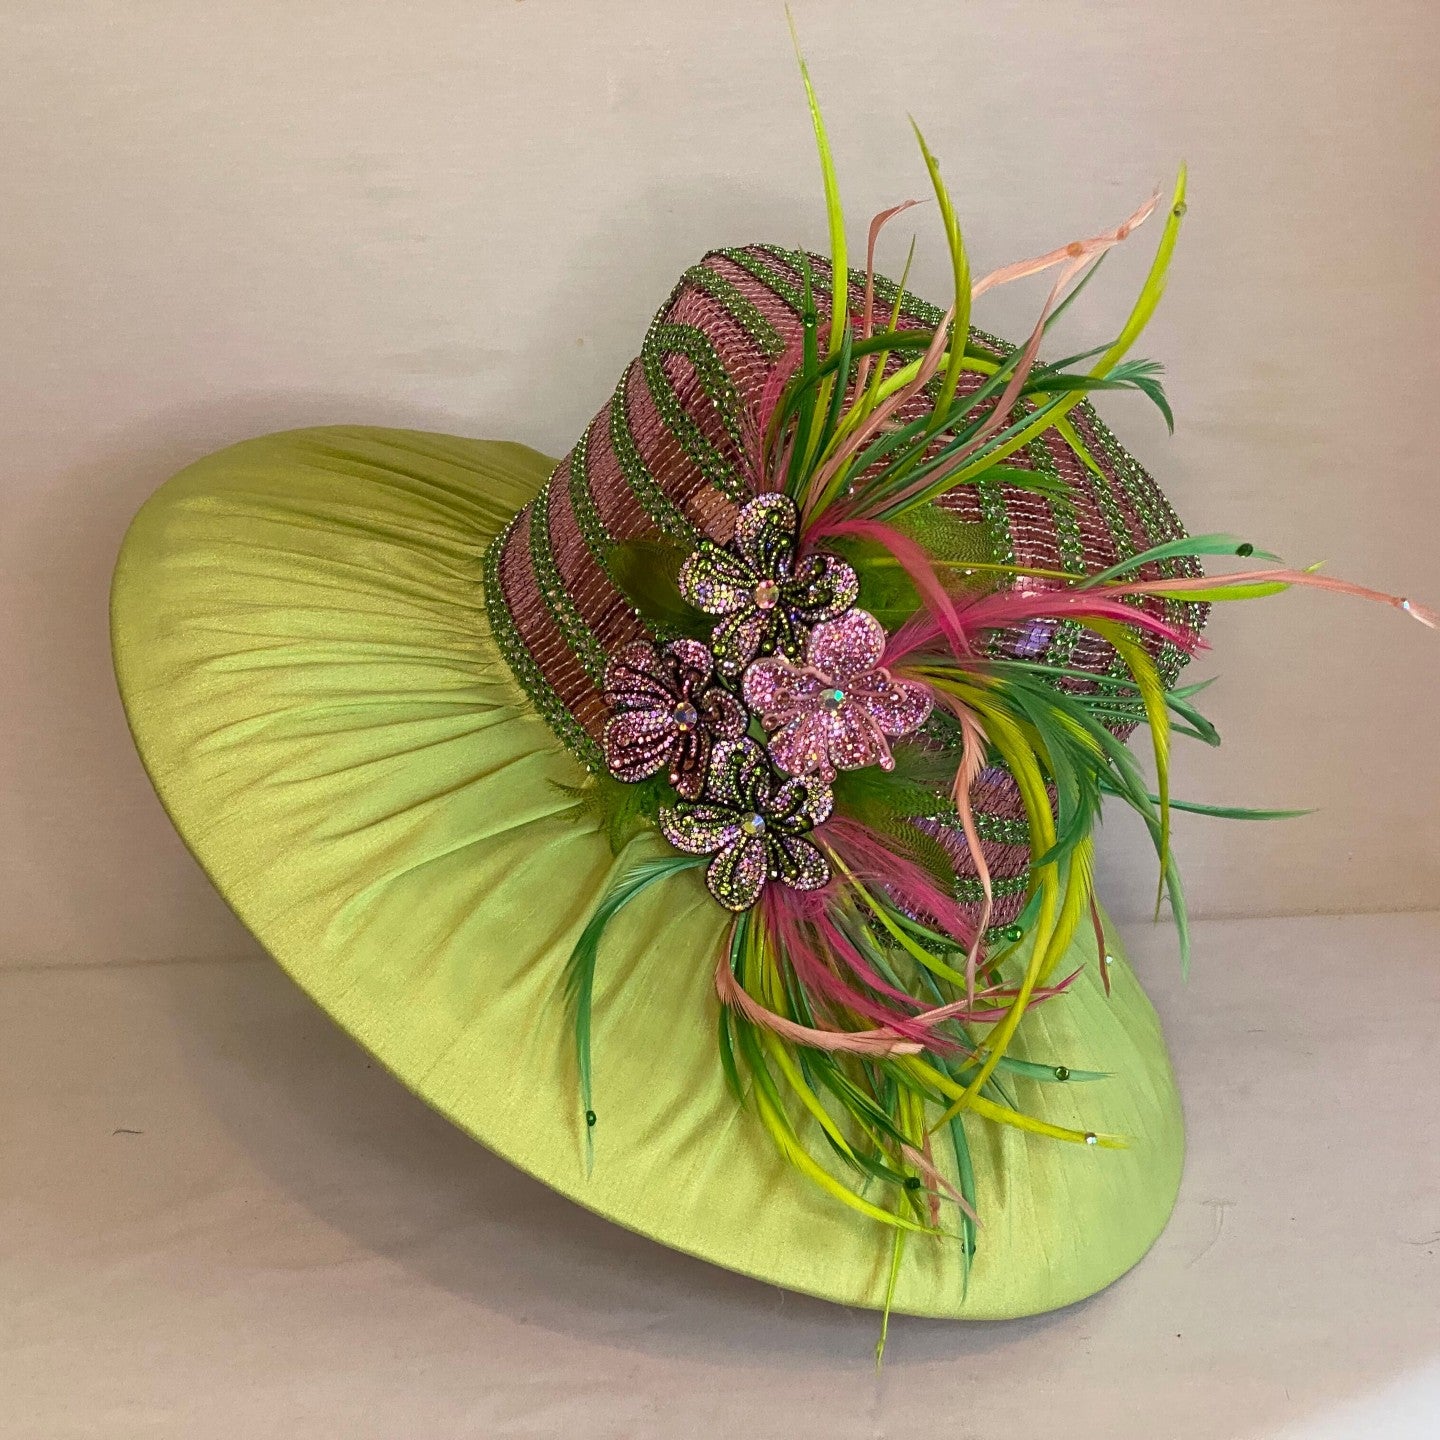 Brighten My Day - Light Weight Derby Hat in Lime Green and Pink Sequins-Animo Hat Company